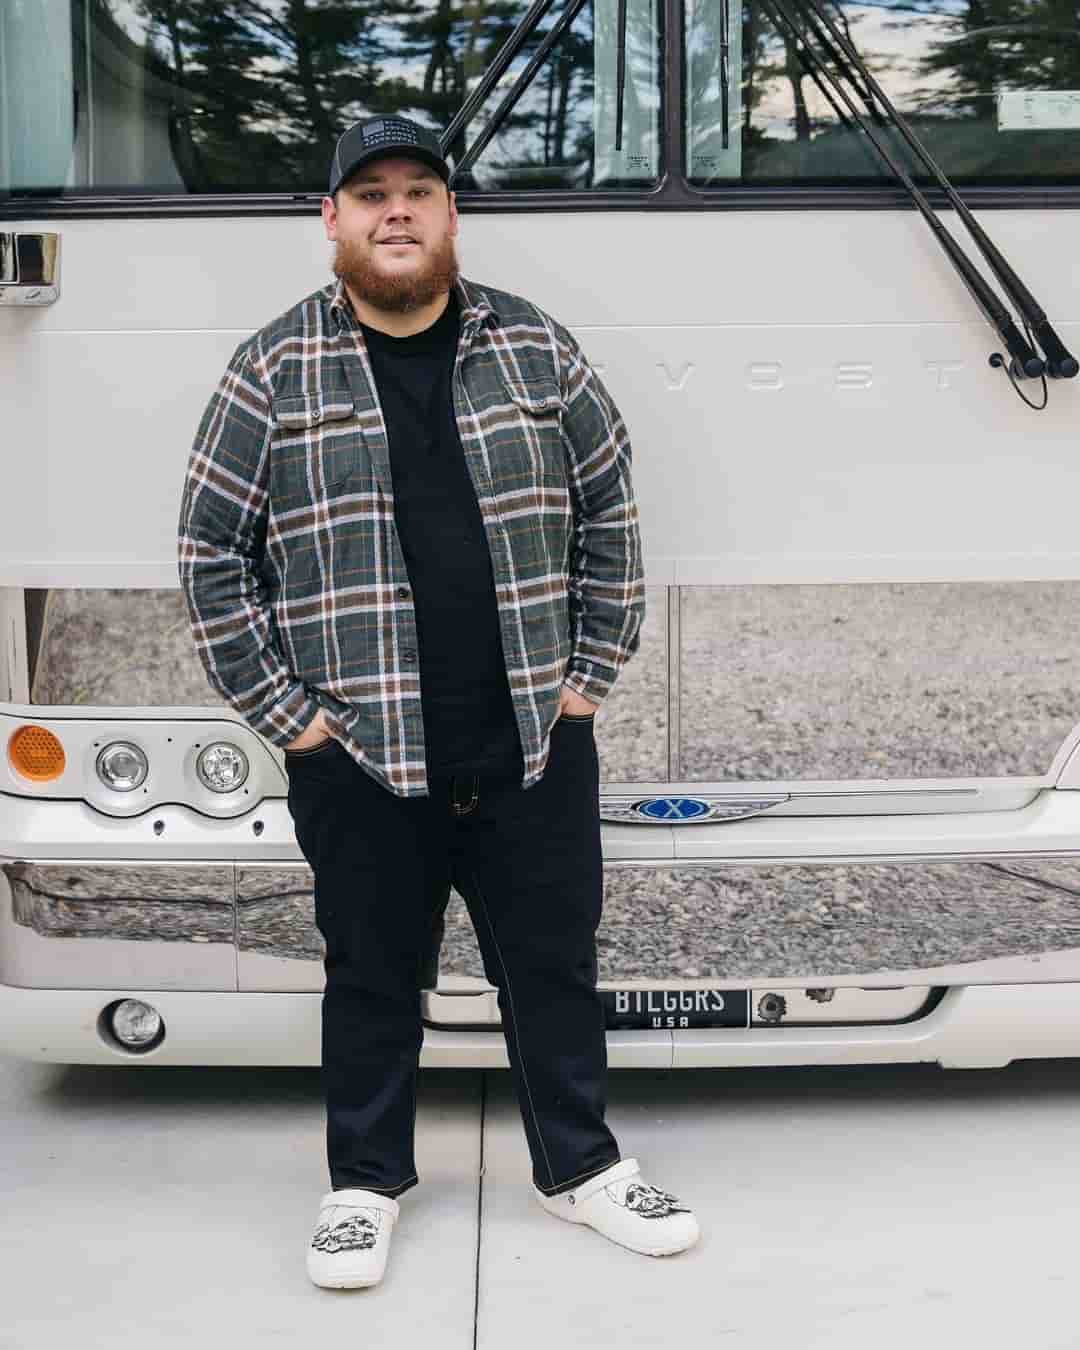 Luke Combs - Biography, Profile, Facts, and Career